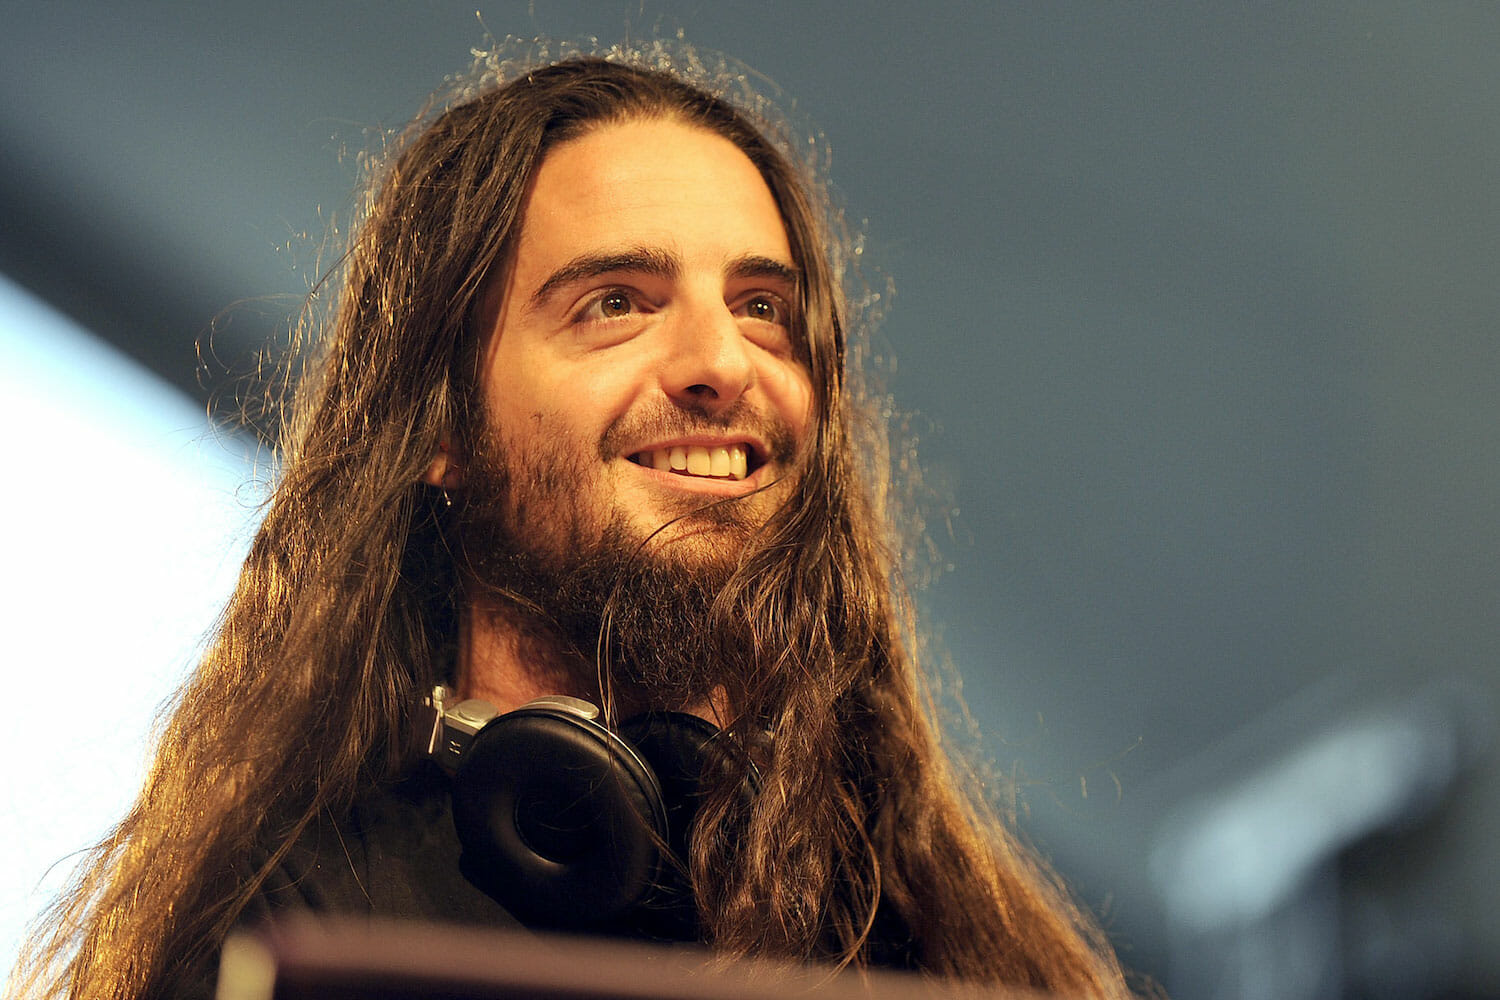 accusations-from-two-new-women-added-to-lawsuit-against-bassnectar-dancing-astronaut